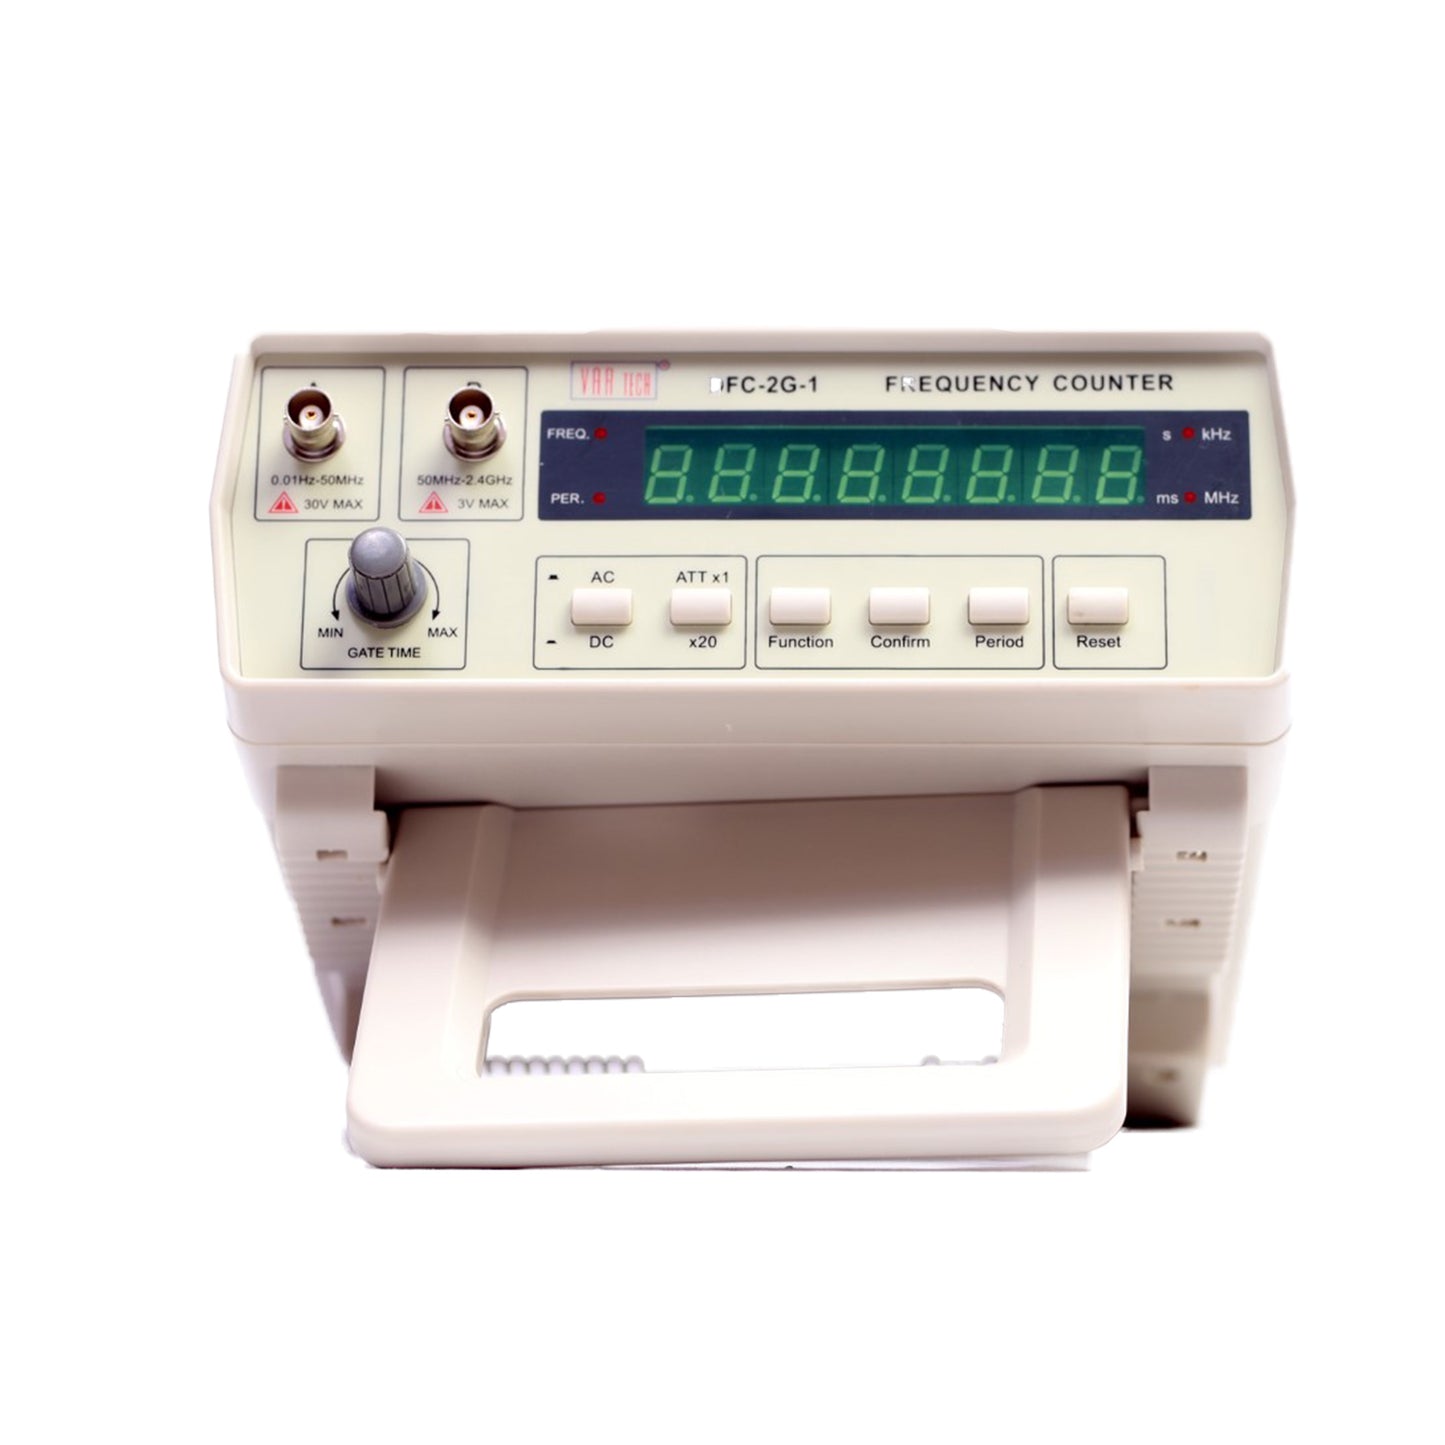 DFC-2G-1 Digital Frequency Counter